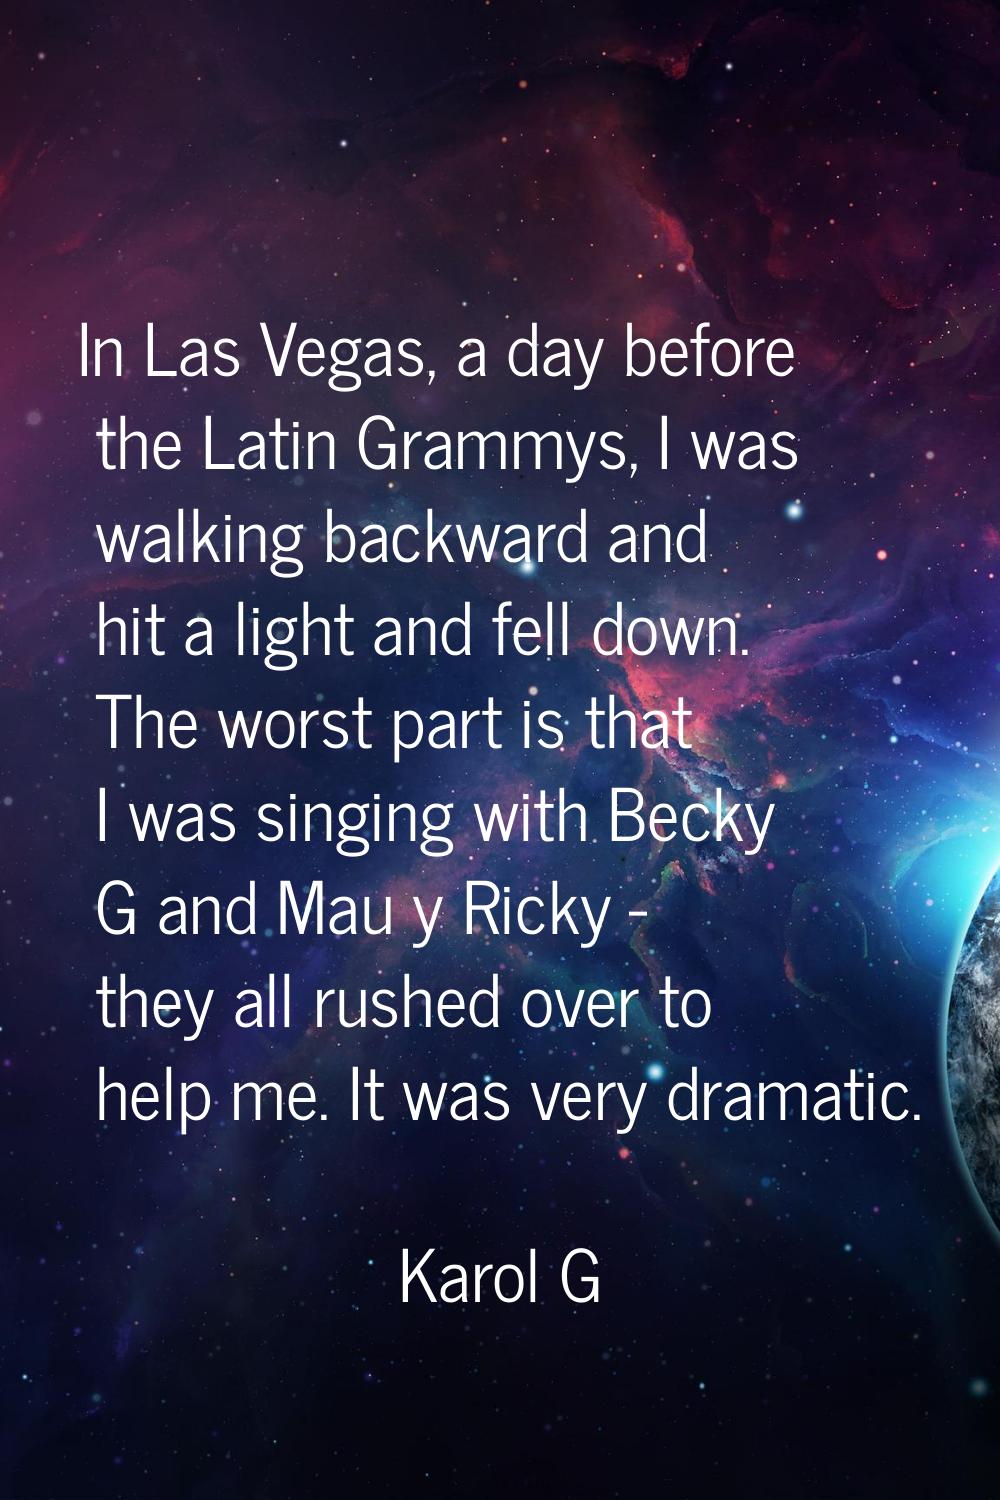 In Las Vegas, a day before the Latin Grammys, I was walking backward and hit a light and fell down.